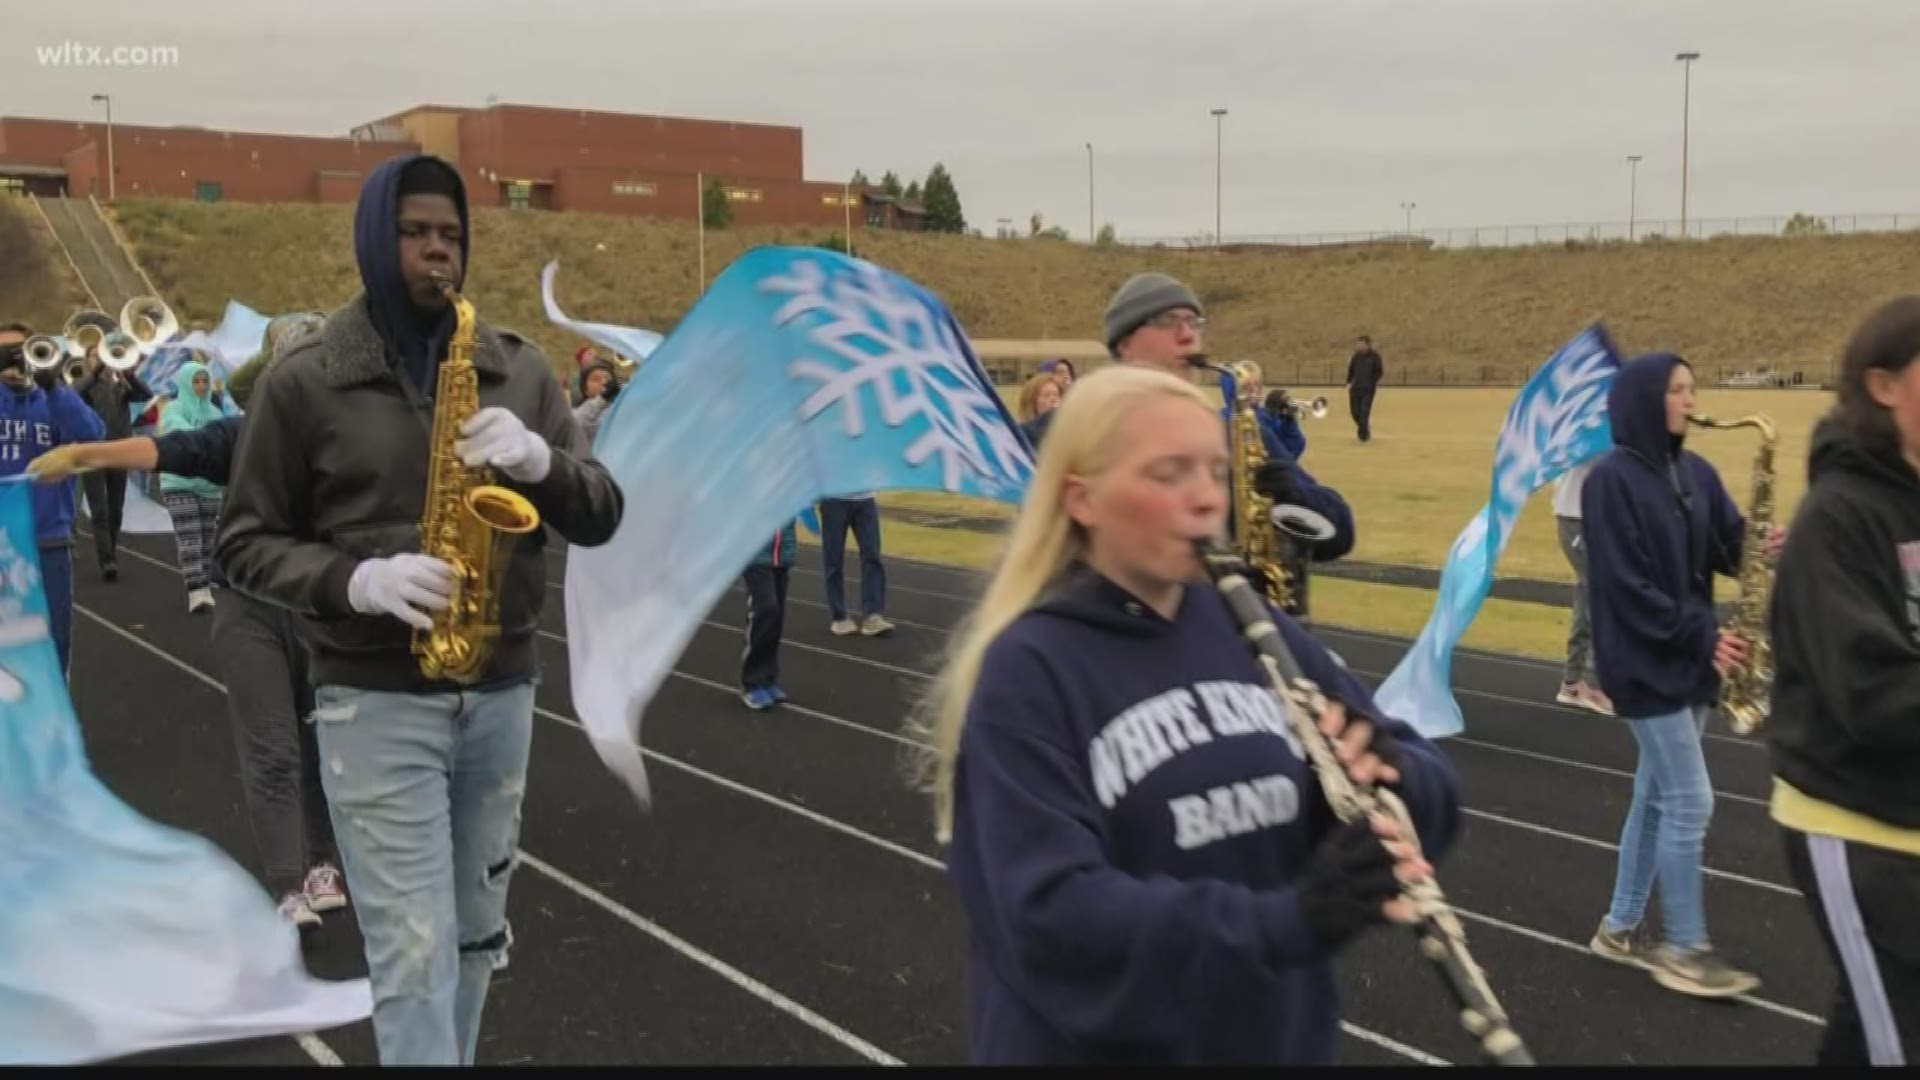 White Knoll High School has been invited to perform in the Philadelphia Thanksgiving Day Parade.